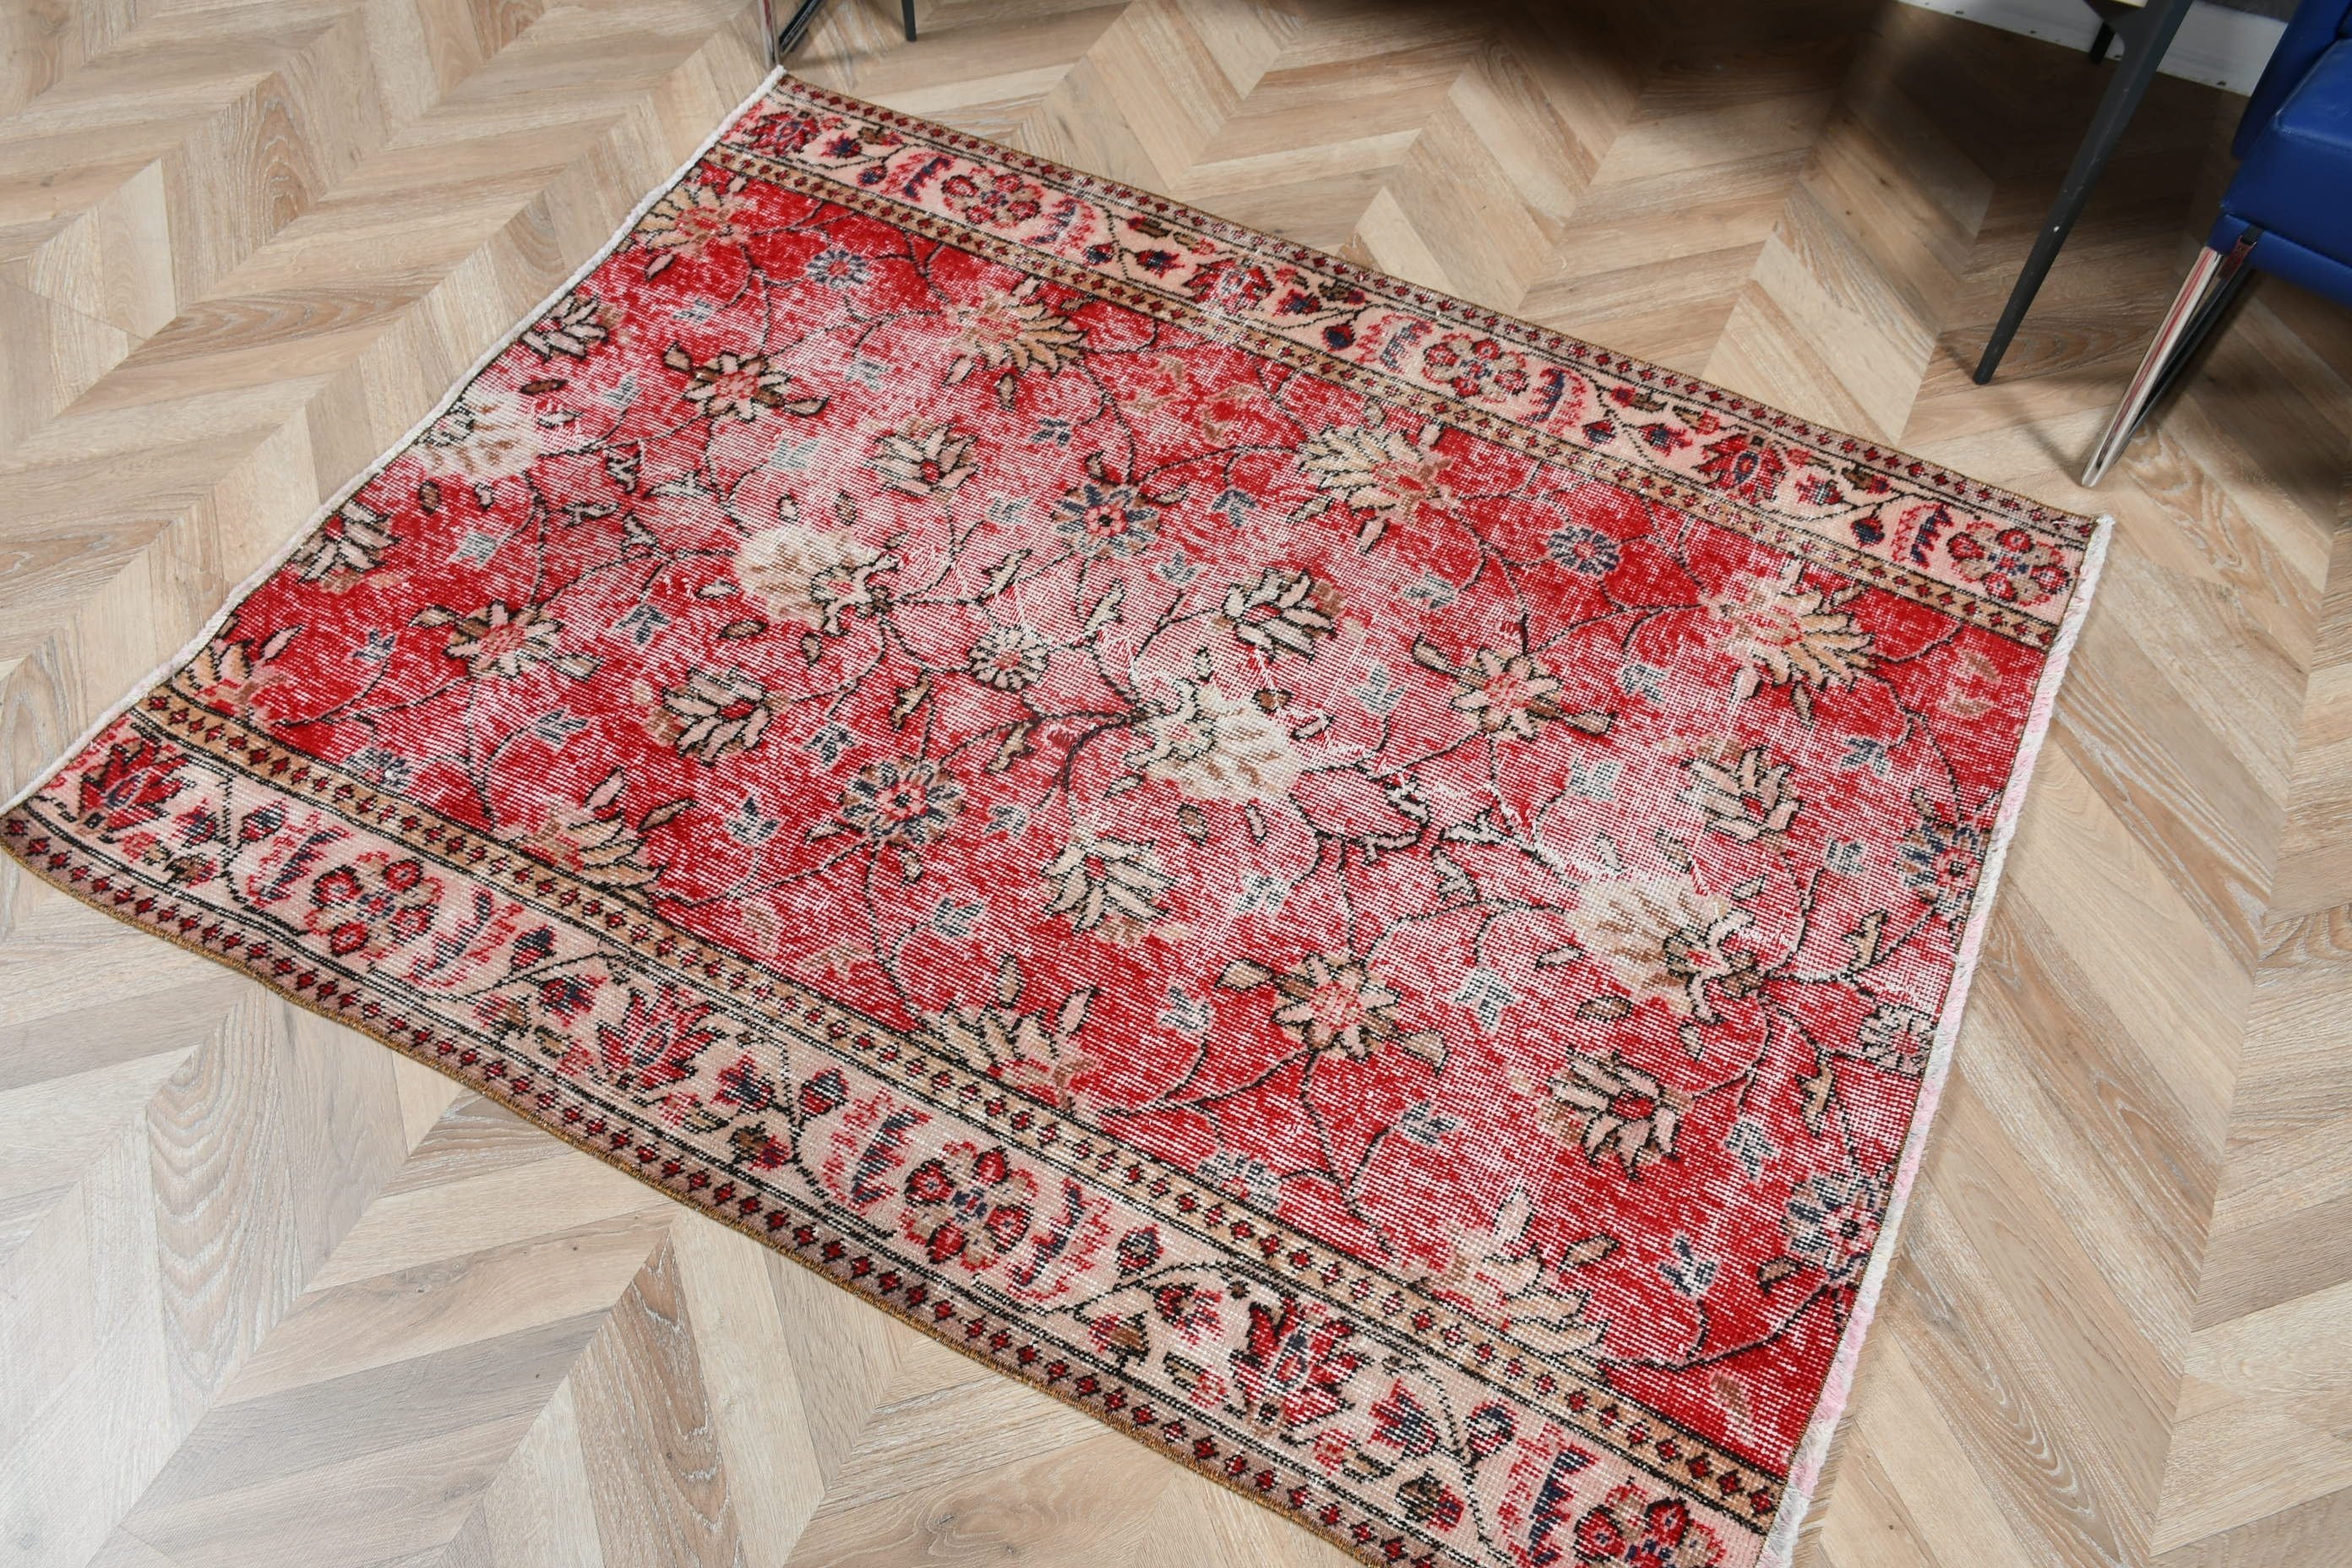 Red Antique Rugs, Rugs for Kitchen, Nursery Rugs, Bedroom Rugs, 3.7x4.6 ft Accent Rugs, Turkish Rugs, Vintage Rug, Oushak Rug, Kitchen Rug